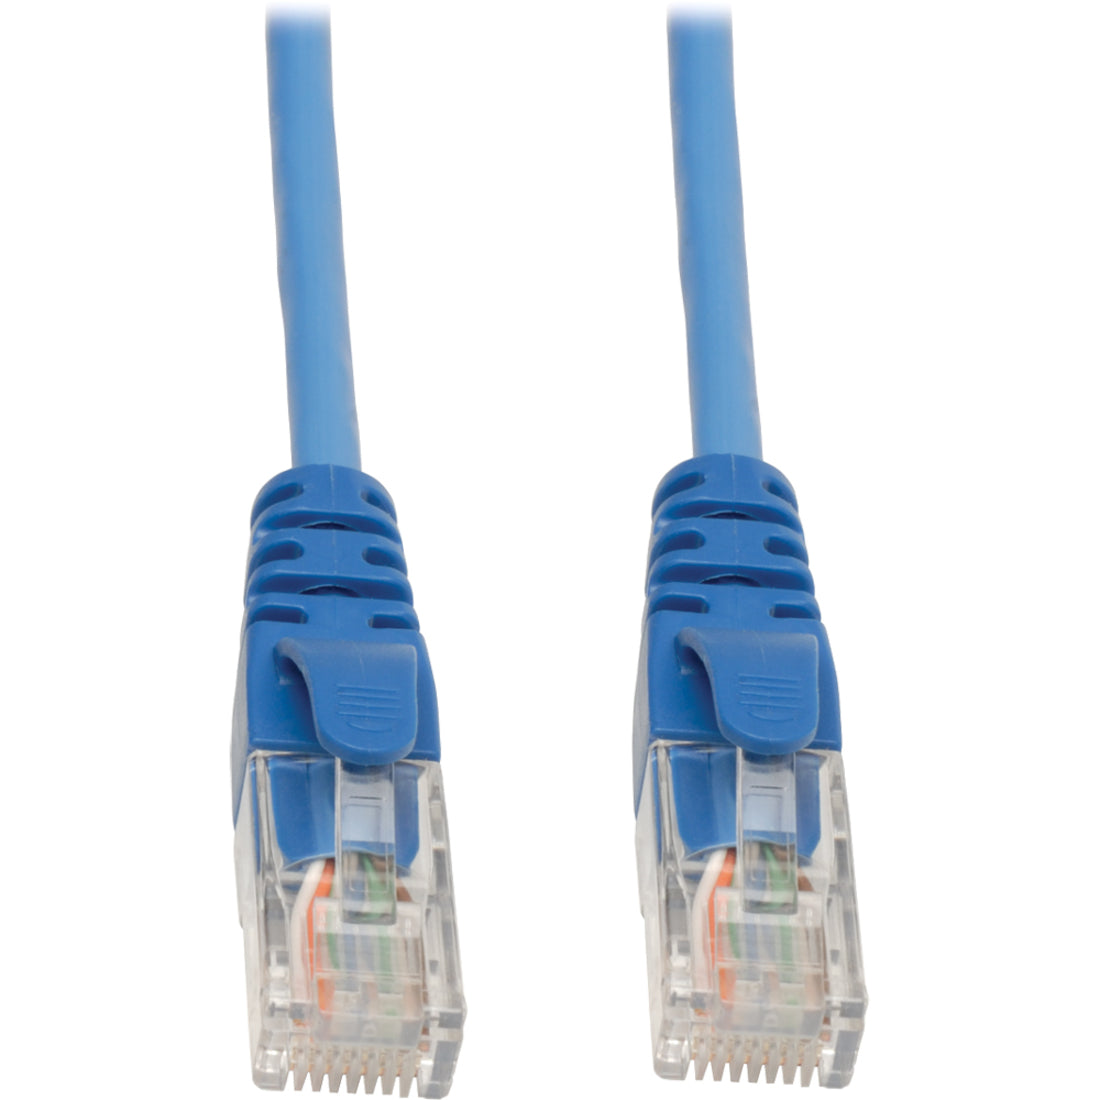 Tripp Lite N003-075-BL-P 75-ft Cat5e Plenum Rated Snagless Patch Cable, Blue - Lifetime Warranty, RoHS Certified